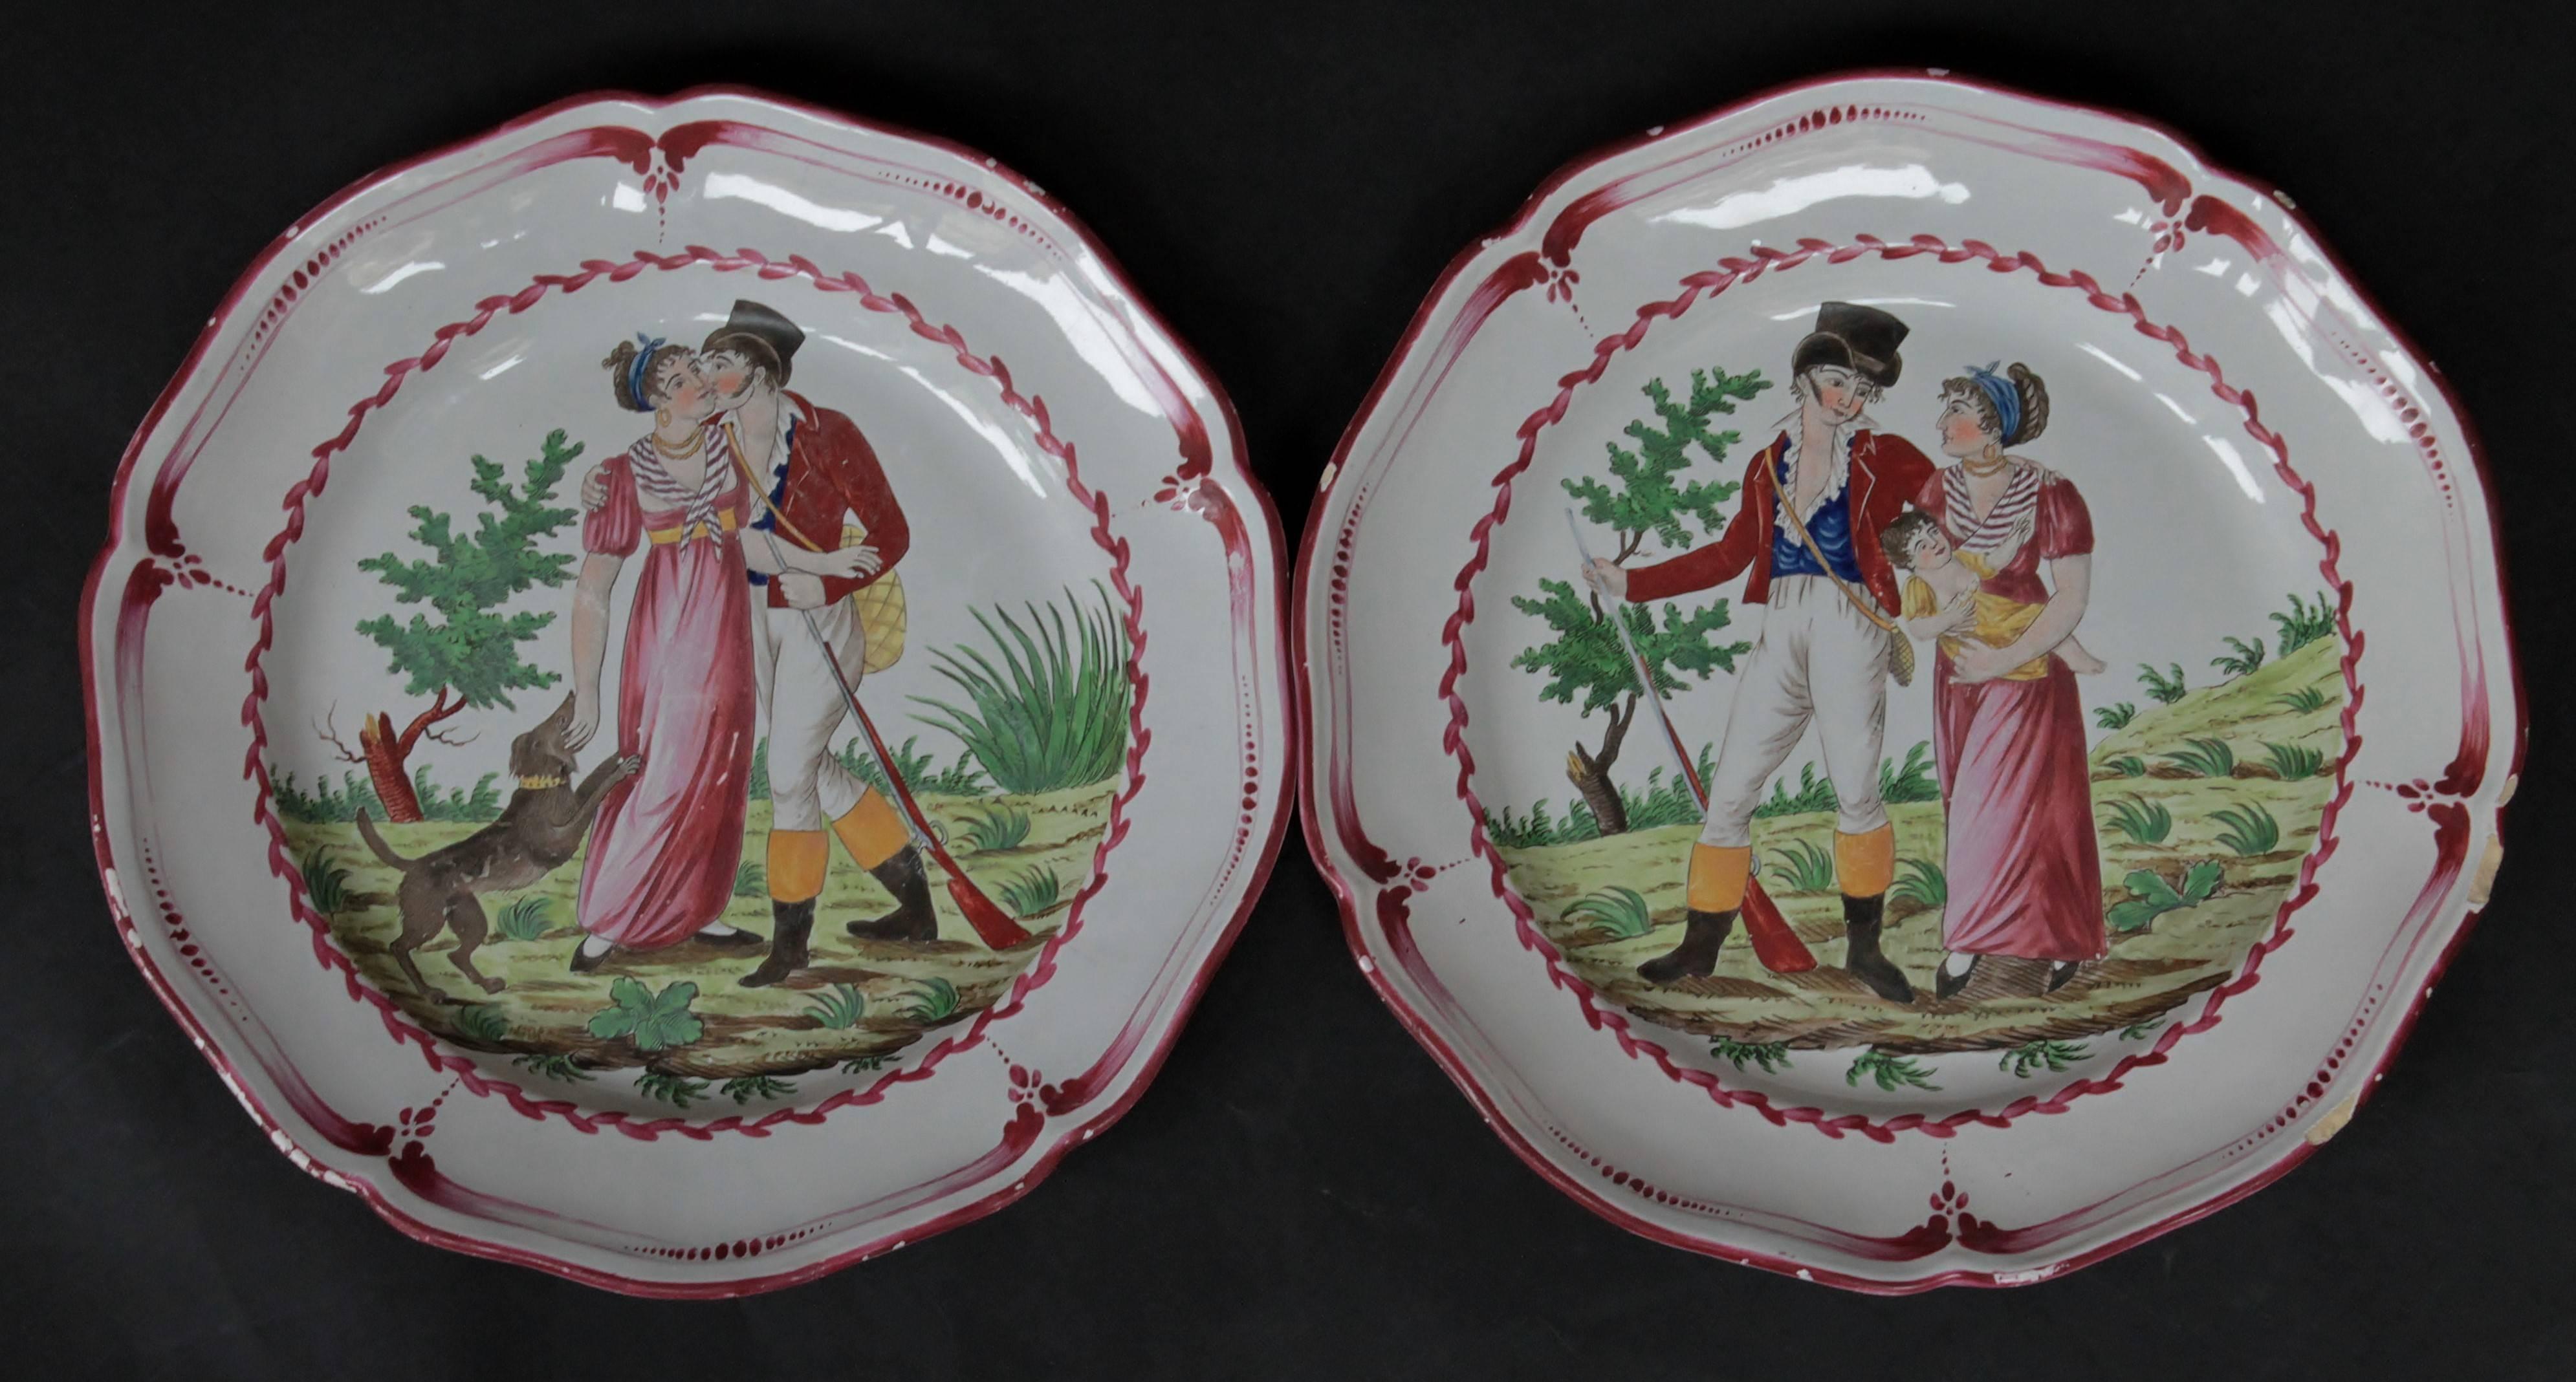 Pair of dishes decorated with a scene of two lovers in a rural setting, it’s a hunter holding a rifle and a bag and the woman with a recumbent dog, walking for the first dish and the same couple with a baby for the second dish. A band of purple